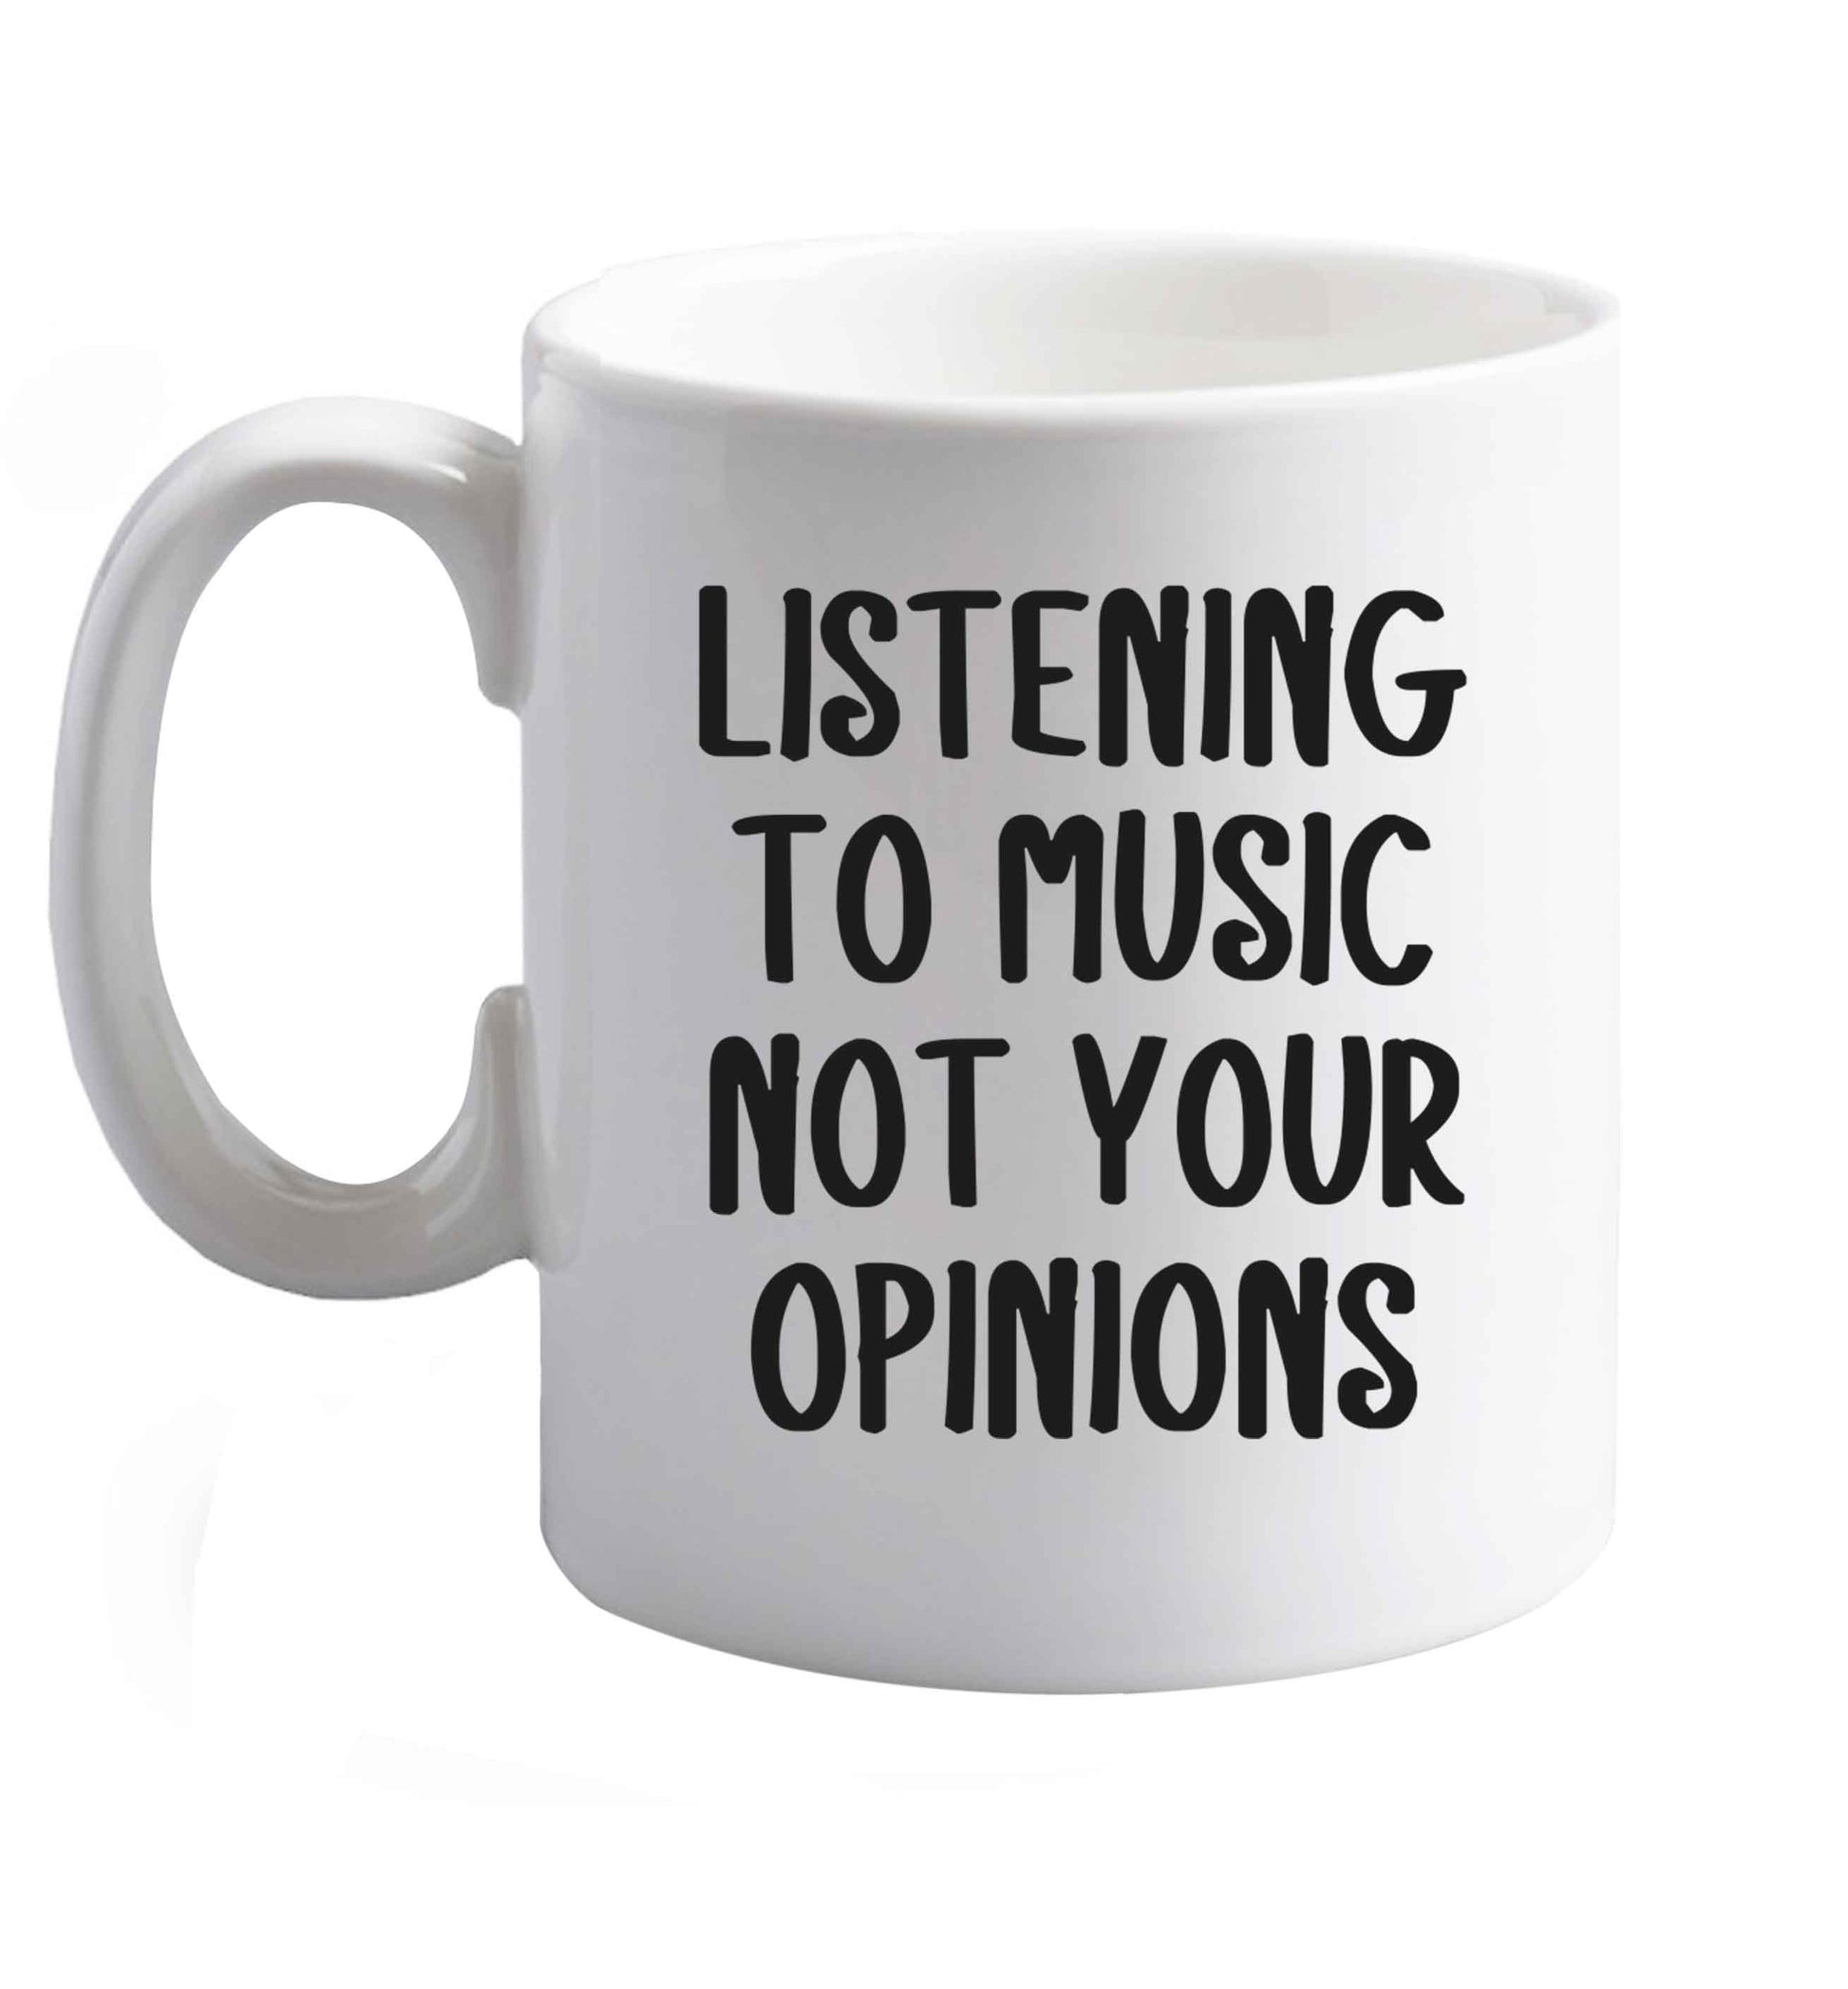 10 oz Listening to music not your opinions  ceramic mug right handed